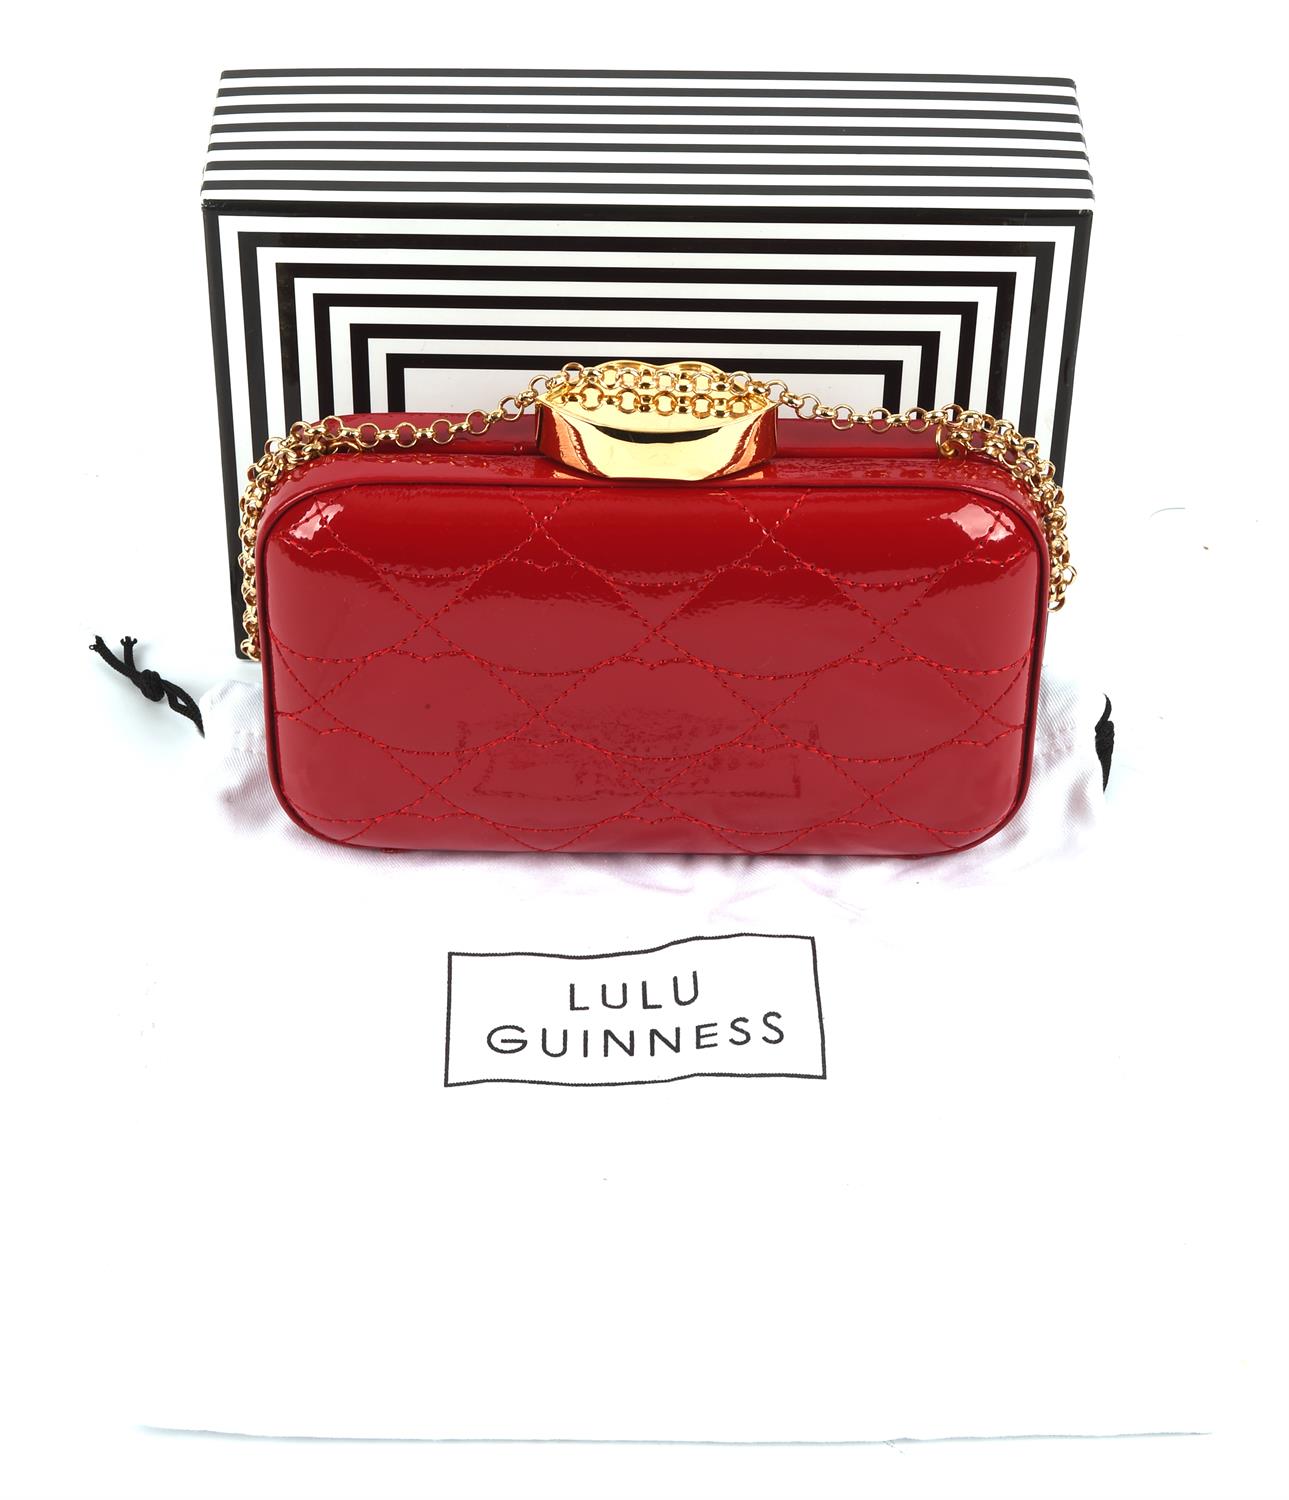 LULU GUINNESS boxed lipstick red leather lips handbag with gold chain and hardware with dust bag - Image 7 of 7